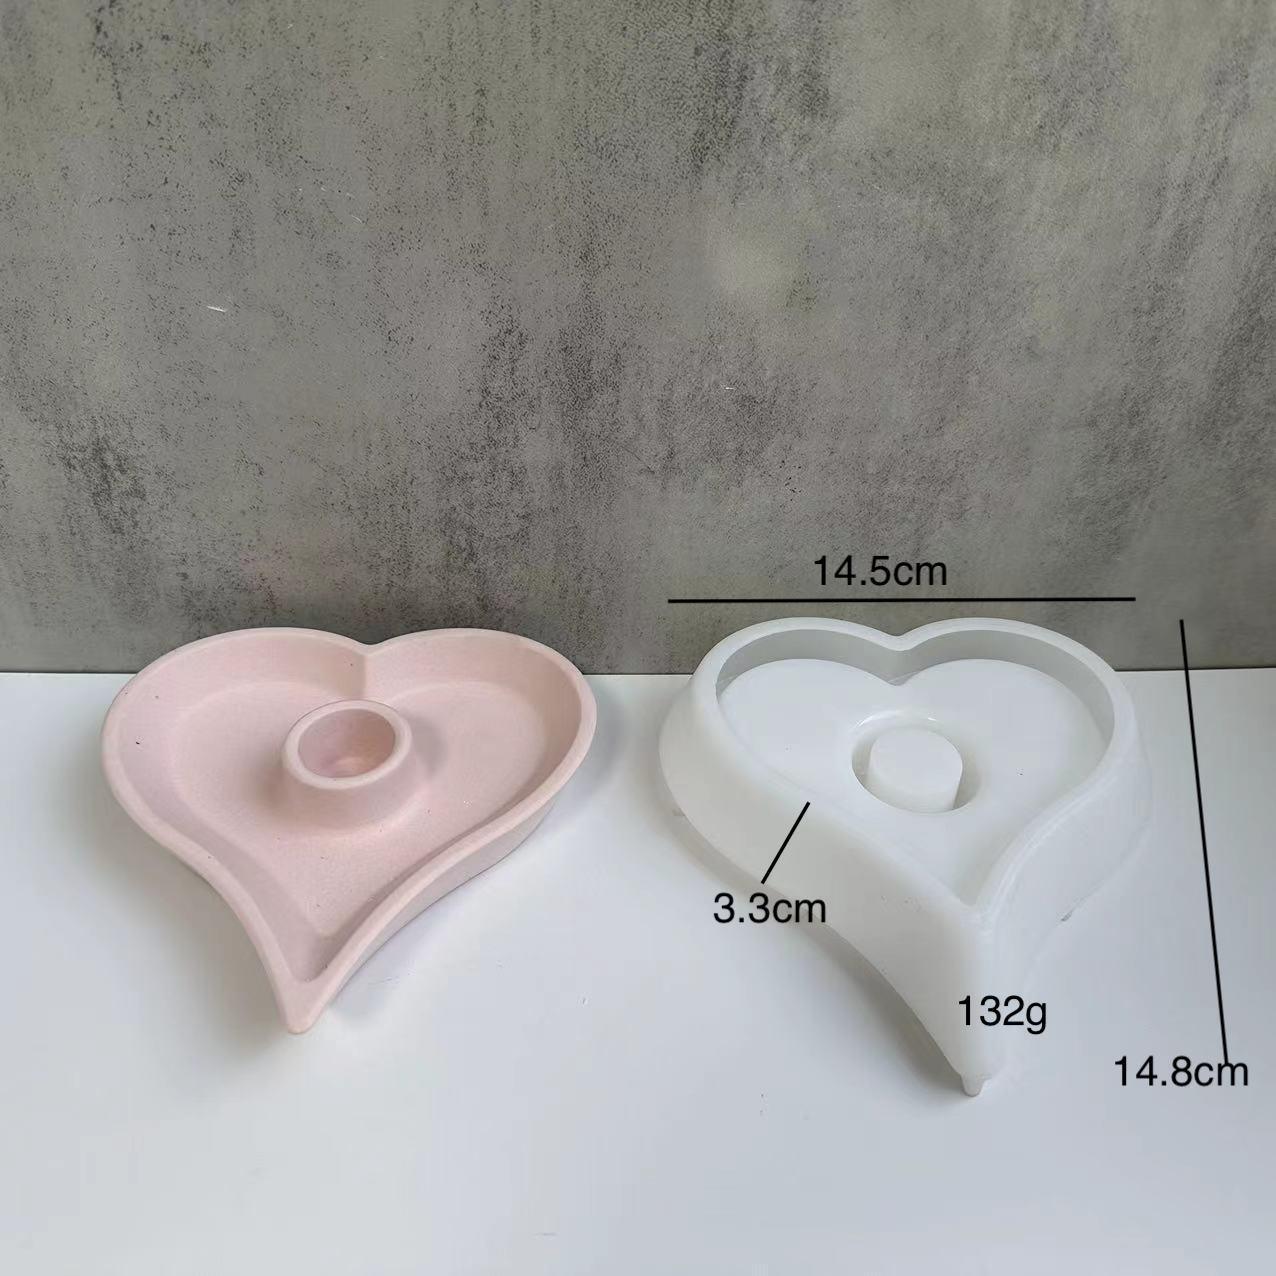 Three-dimensional Round Heart-shaped Candle Holder Silicone MoldT198 Style  